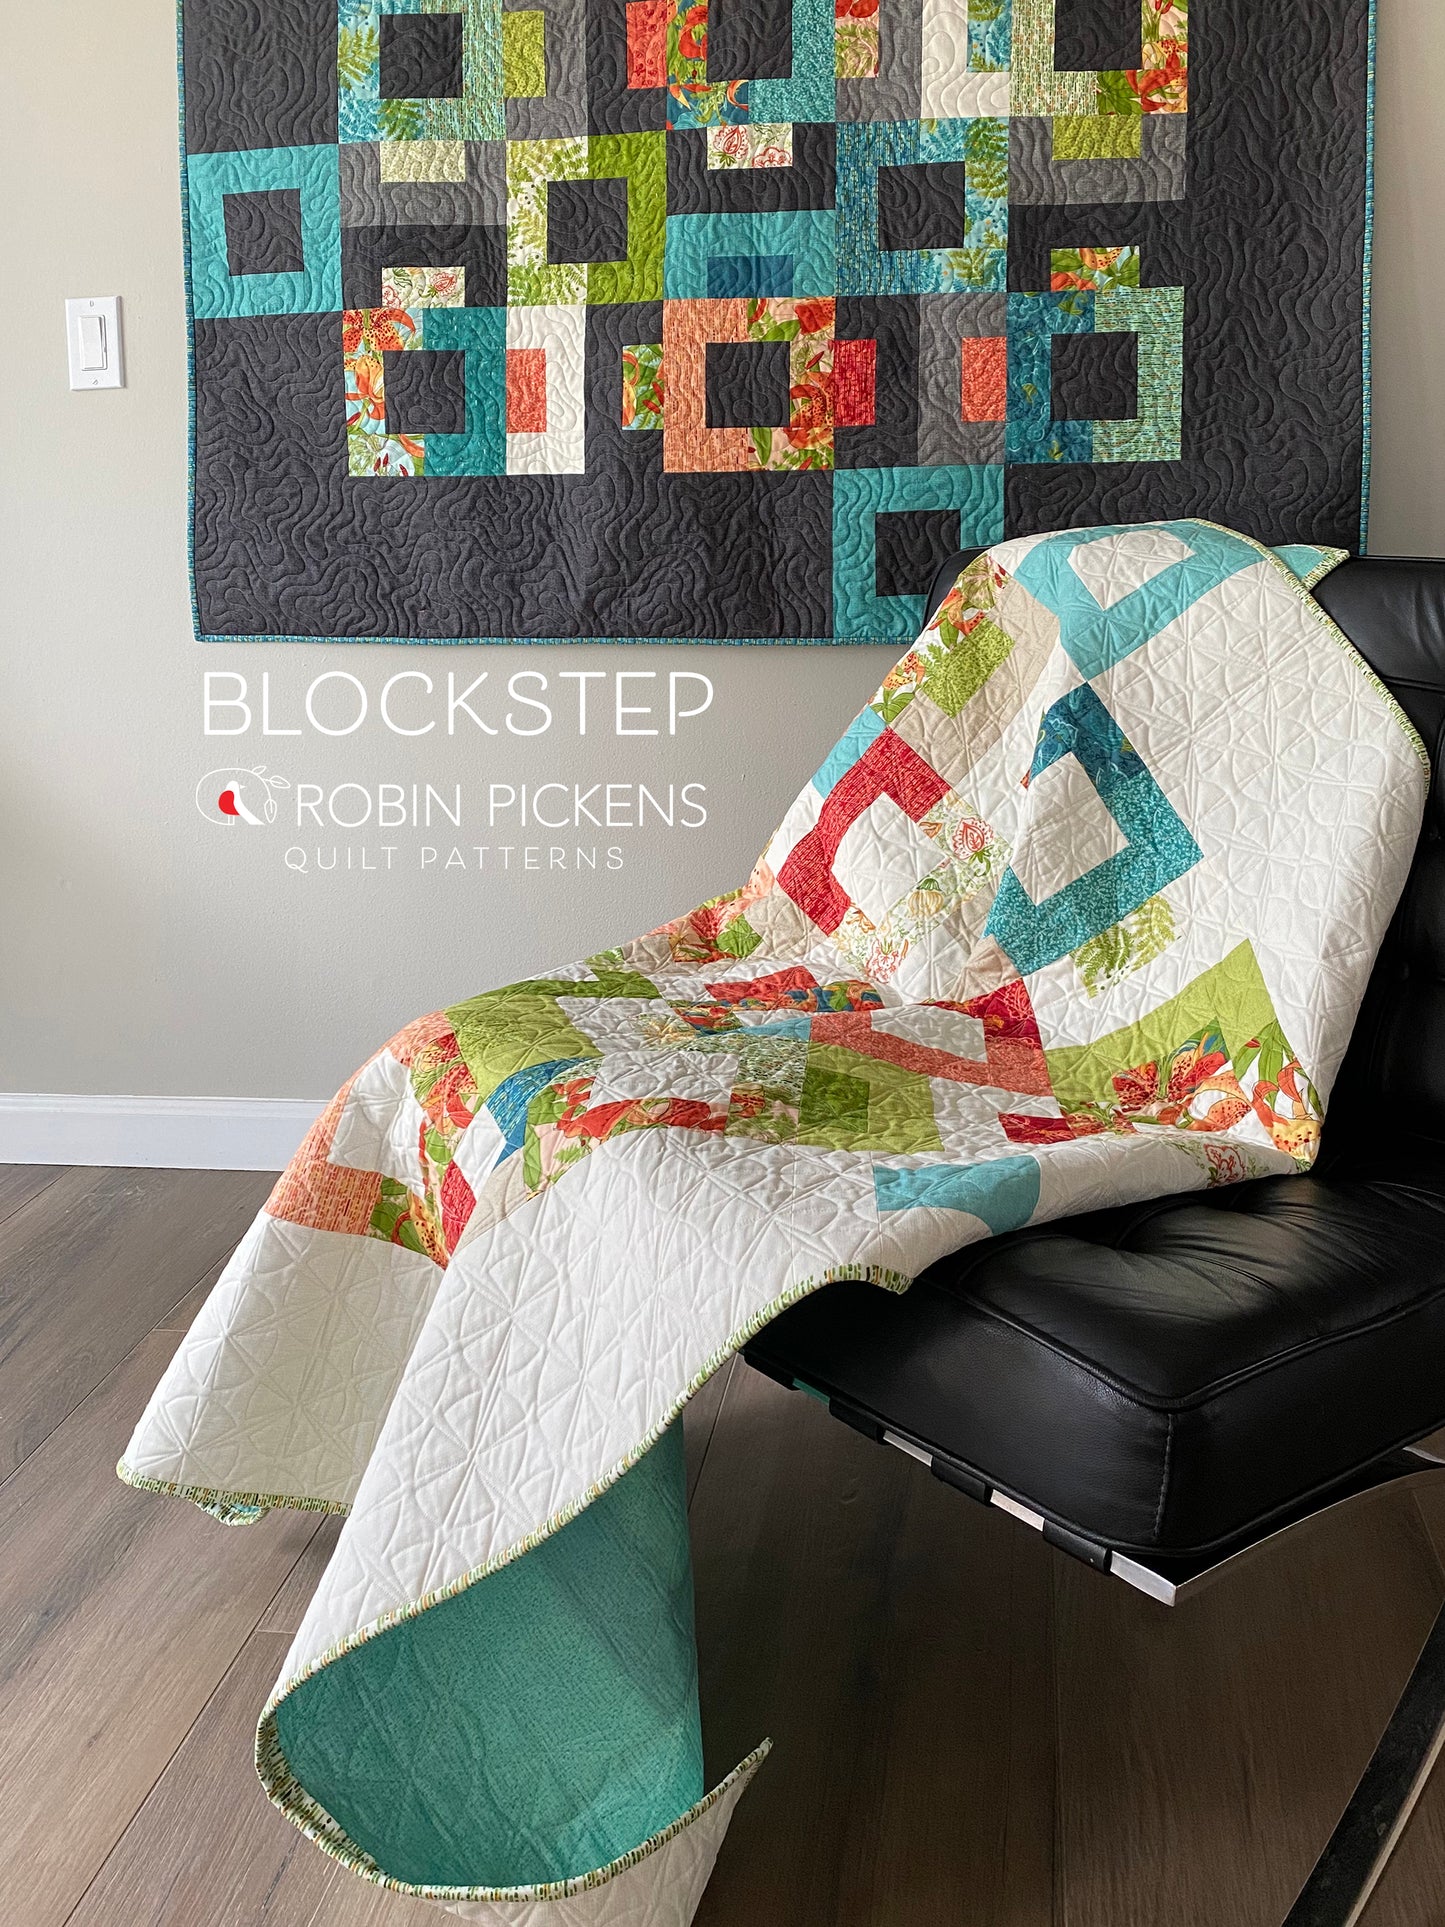 BLOCKSTEP Digital PDF Quilt Pattern by Robin Pickens / Layer Cake & Jelly Roll friendly/ Wall, Twin, Queen Sizes